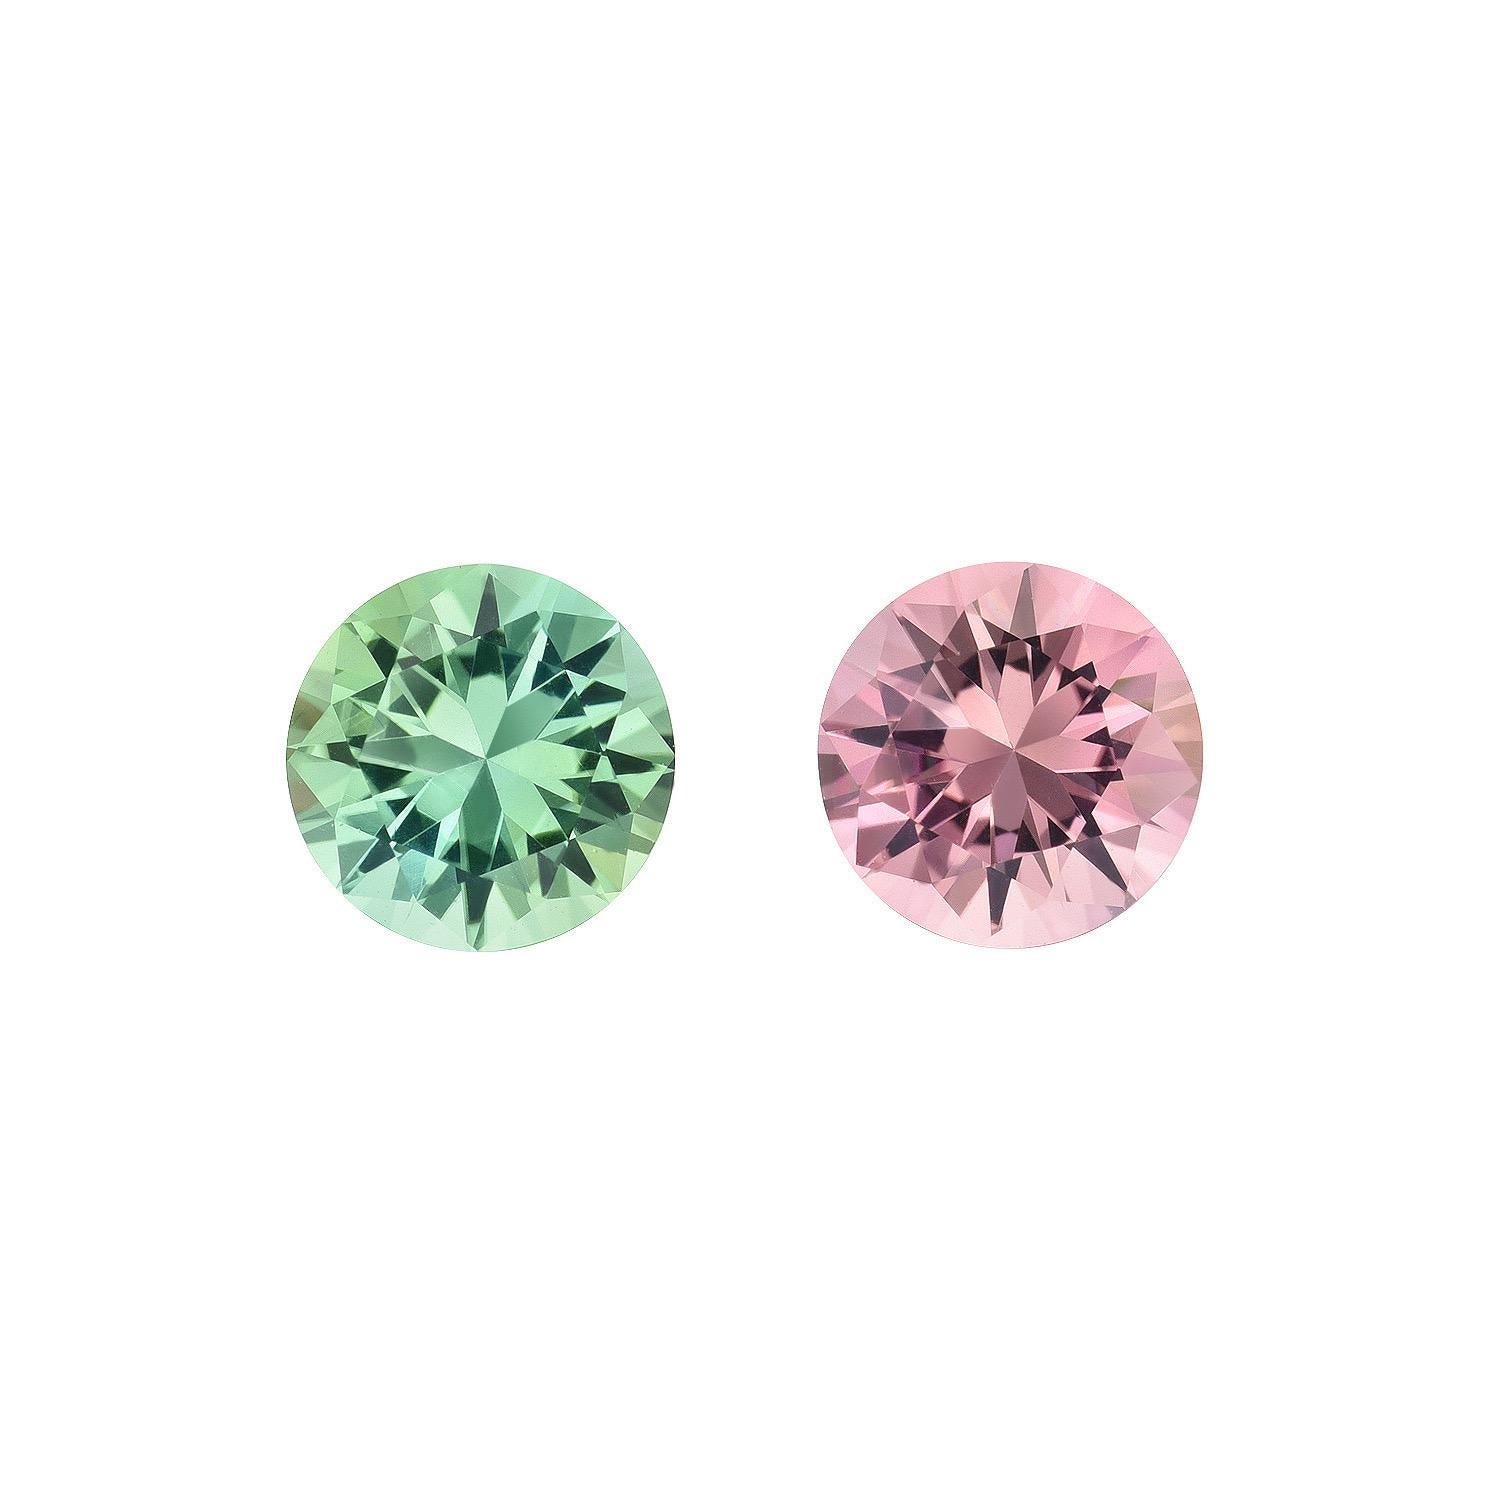 Perfectly mismatched set of Pink and Green Tourmalines unmounted round gemstones, weighing a total of 3.40 carats. 
Dimensions: Top pair 6mm. Bottom pair 6.7mm.
Weights: Top pair 1.44 carats. Bottom pair 1.96 carats.
Returns are accepted and paid by